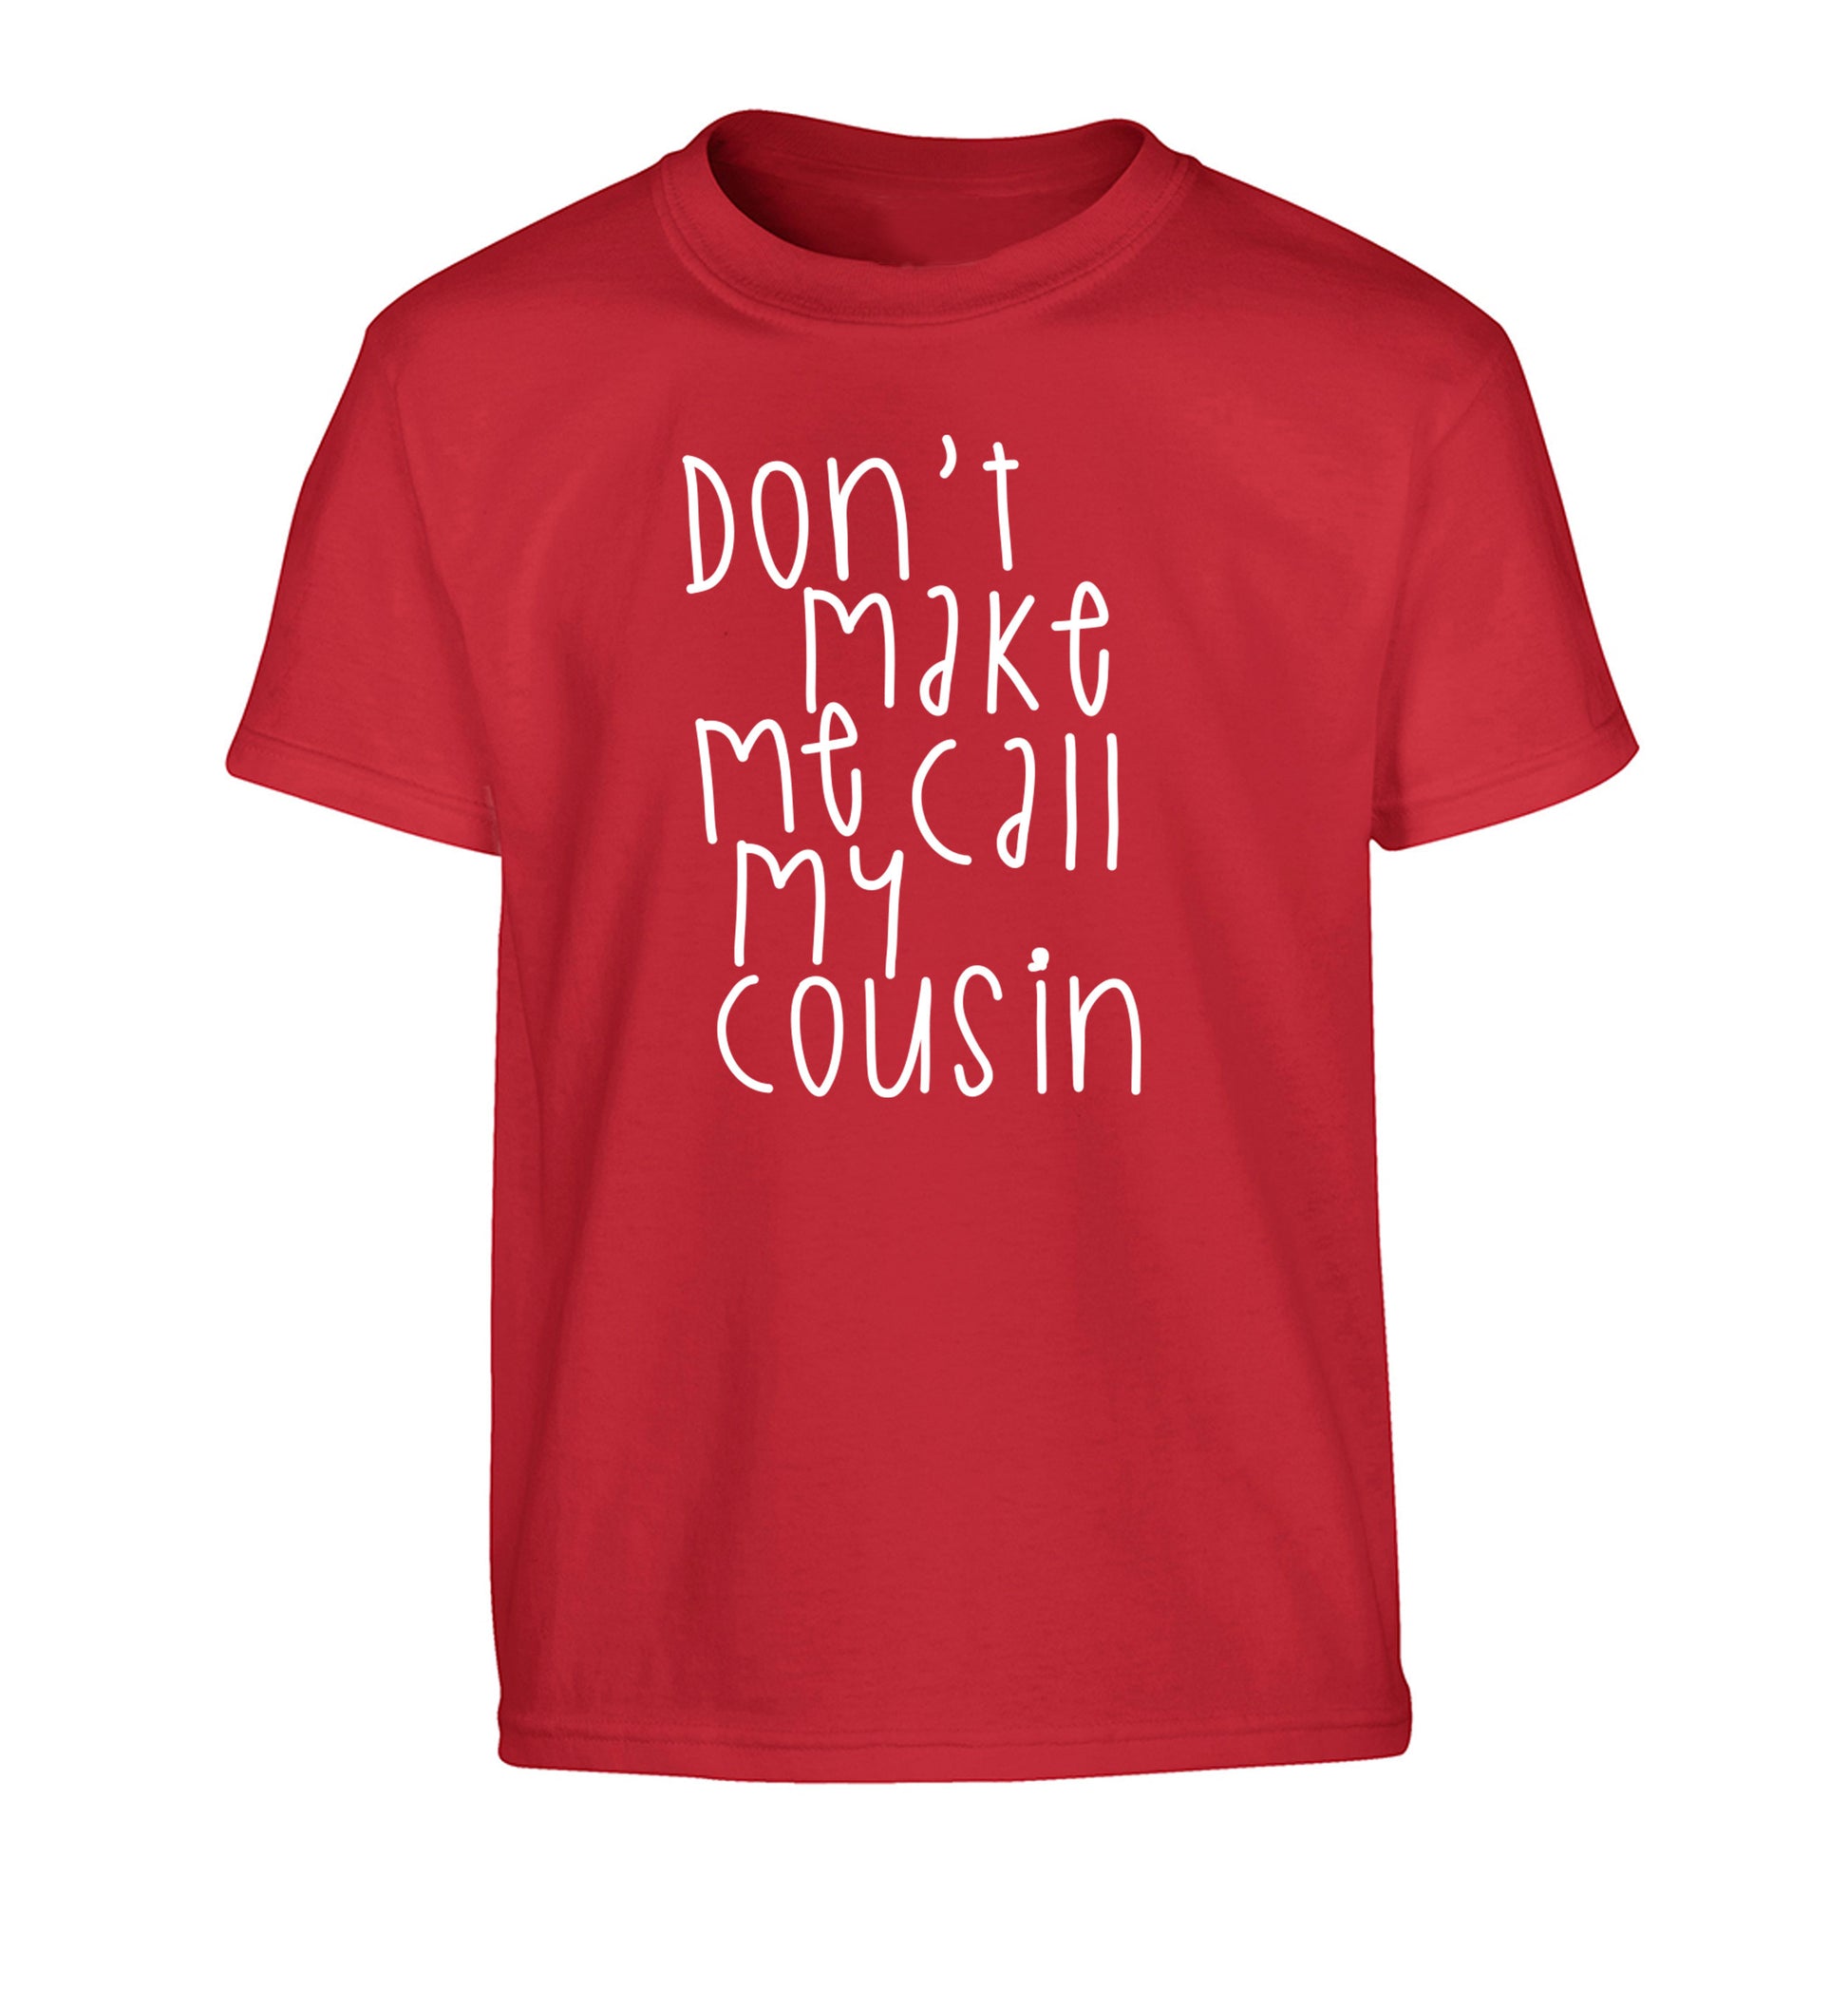 Don't make me call my cousin Children's red Tshirt 12-14 Years